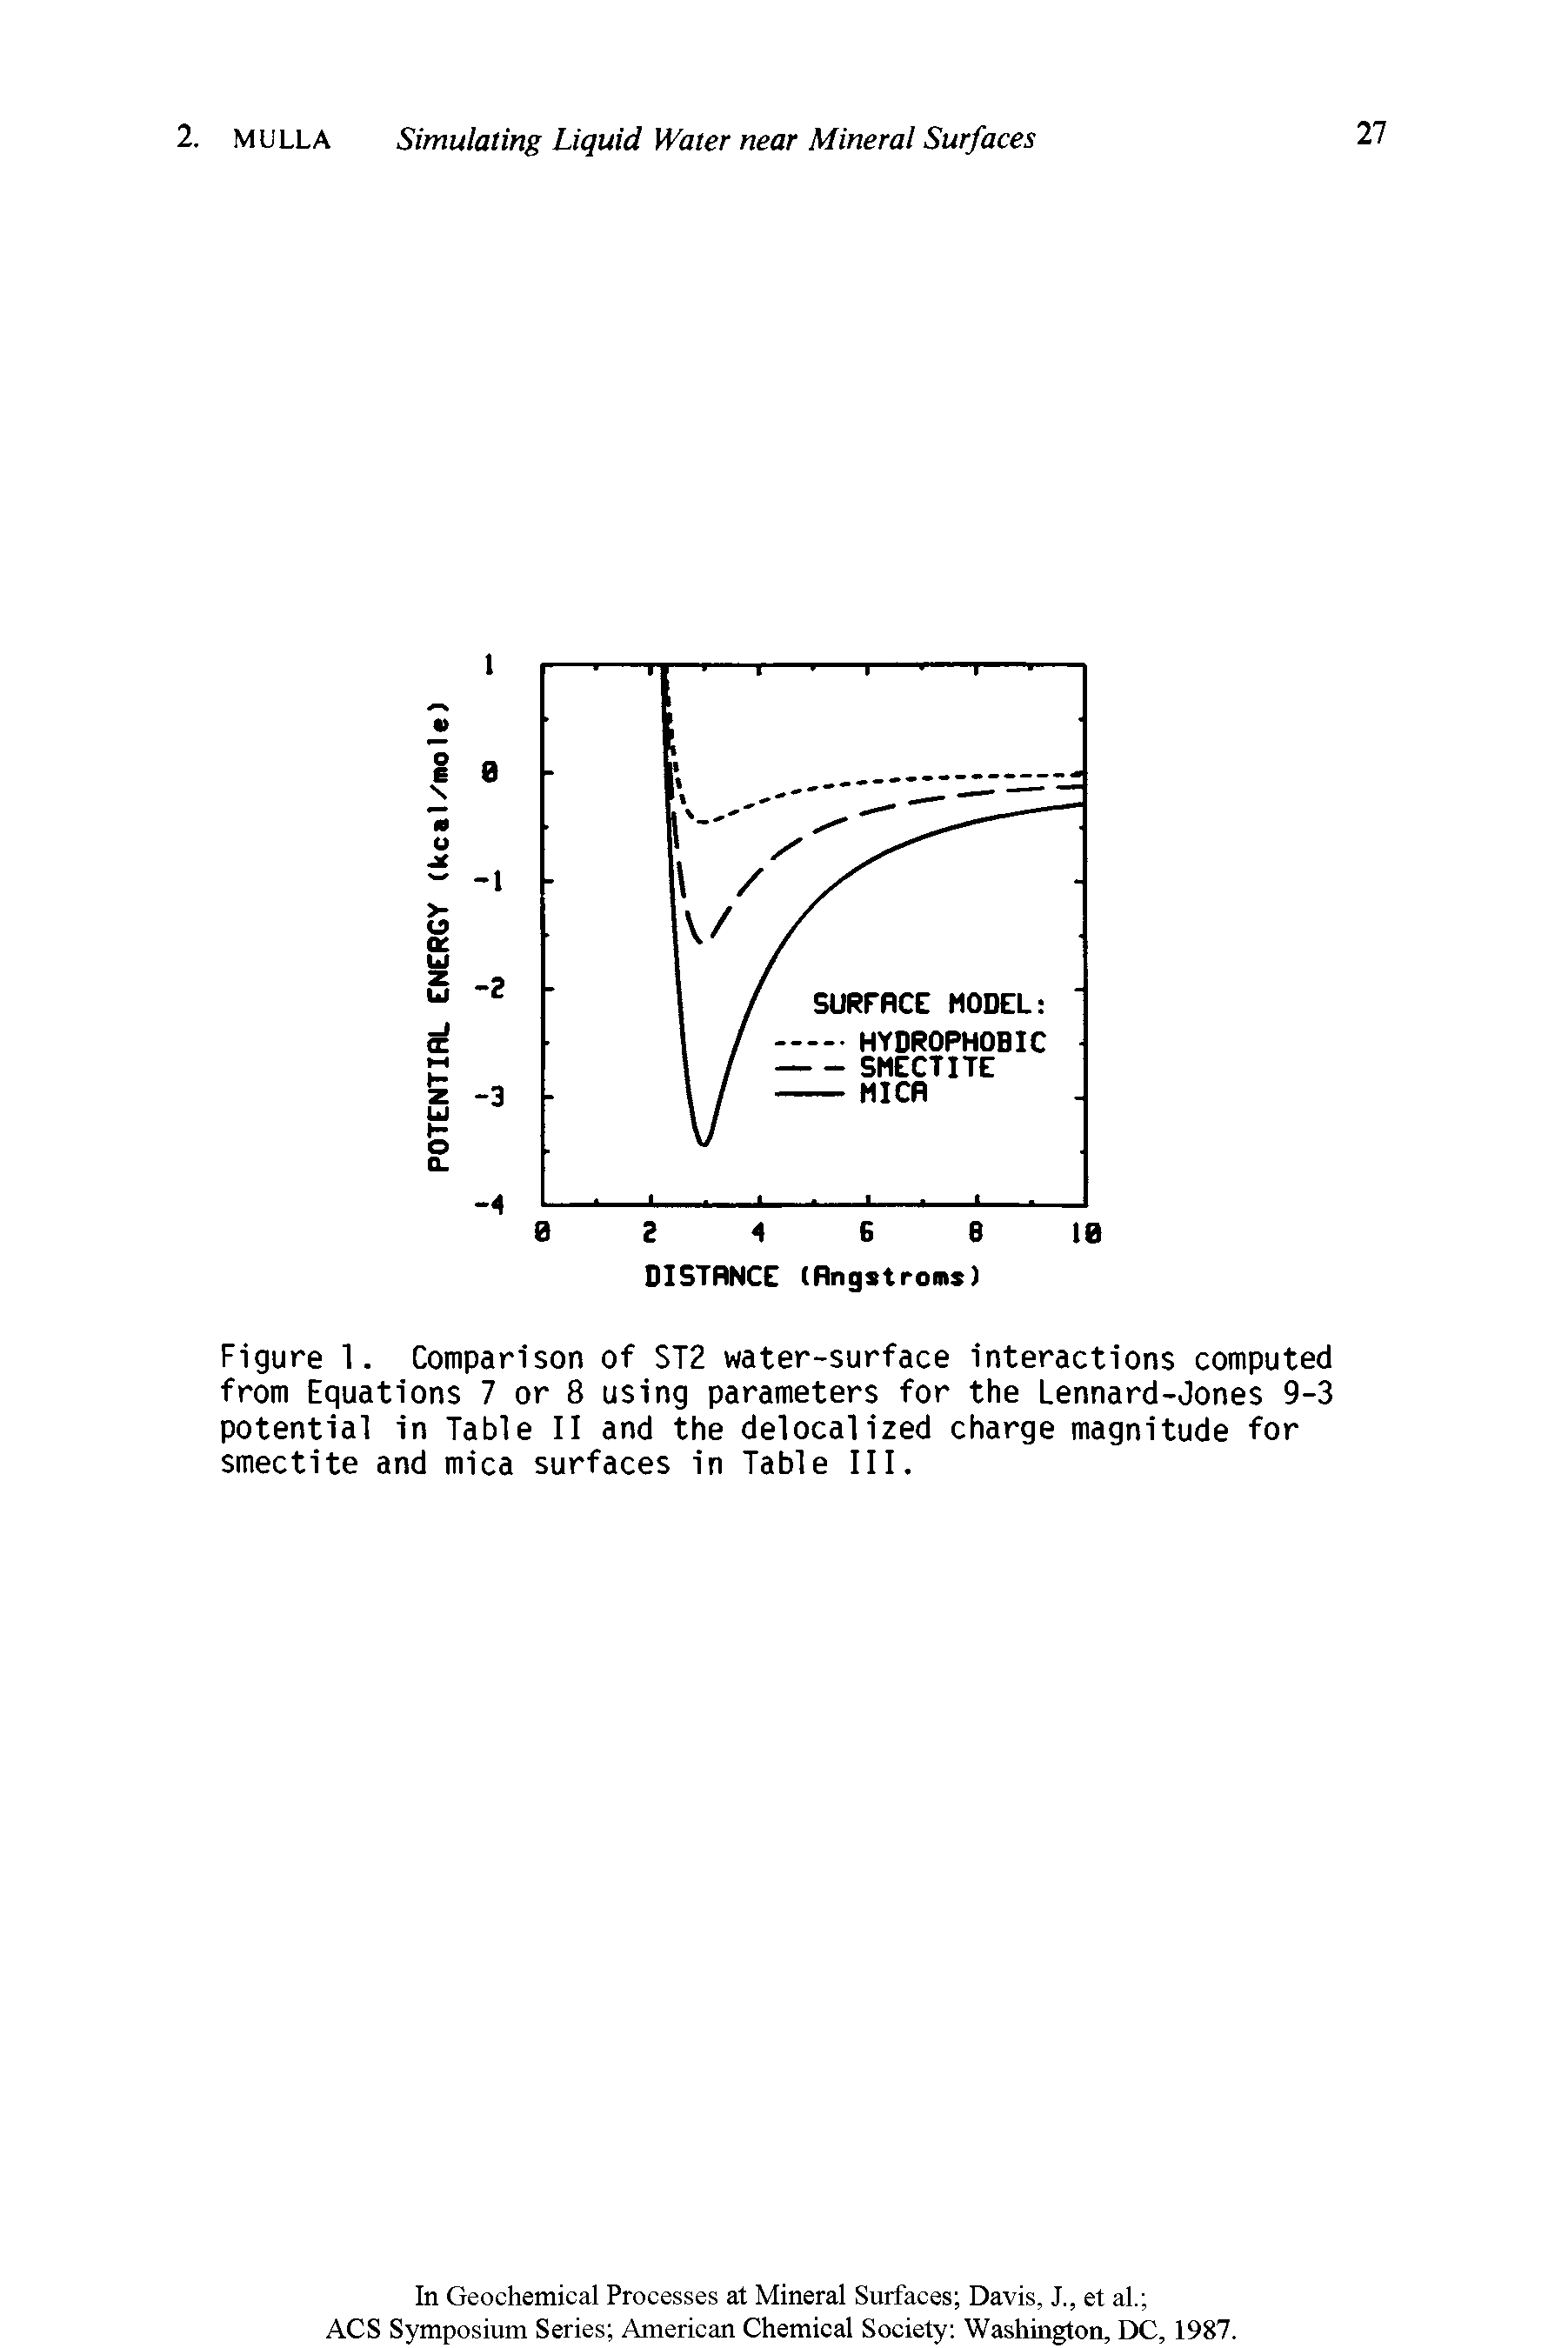 Figure 1. Comparison of ST2 water-surface interactions computed from Equations 7 or 8 using parameters for the Lennard-Jones 9-3 potential in Table II and the delocalized charge magnitude for smectite and mica surfaces in Table III.